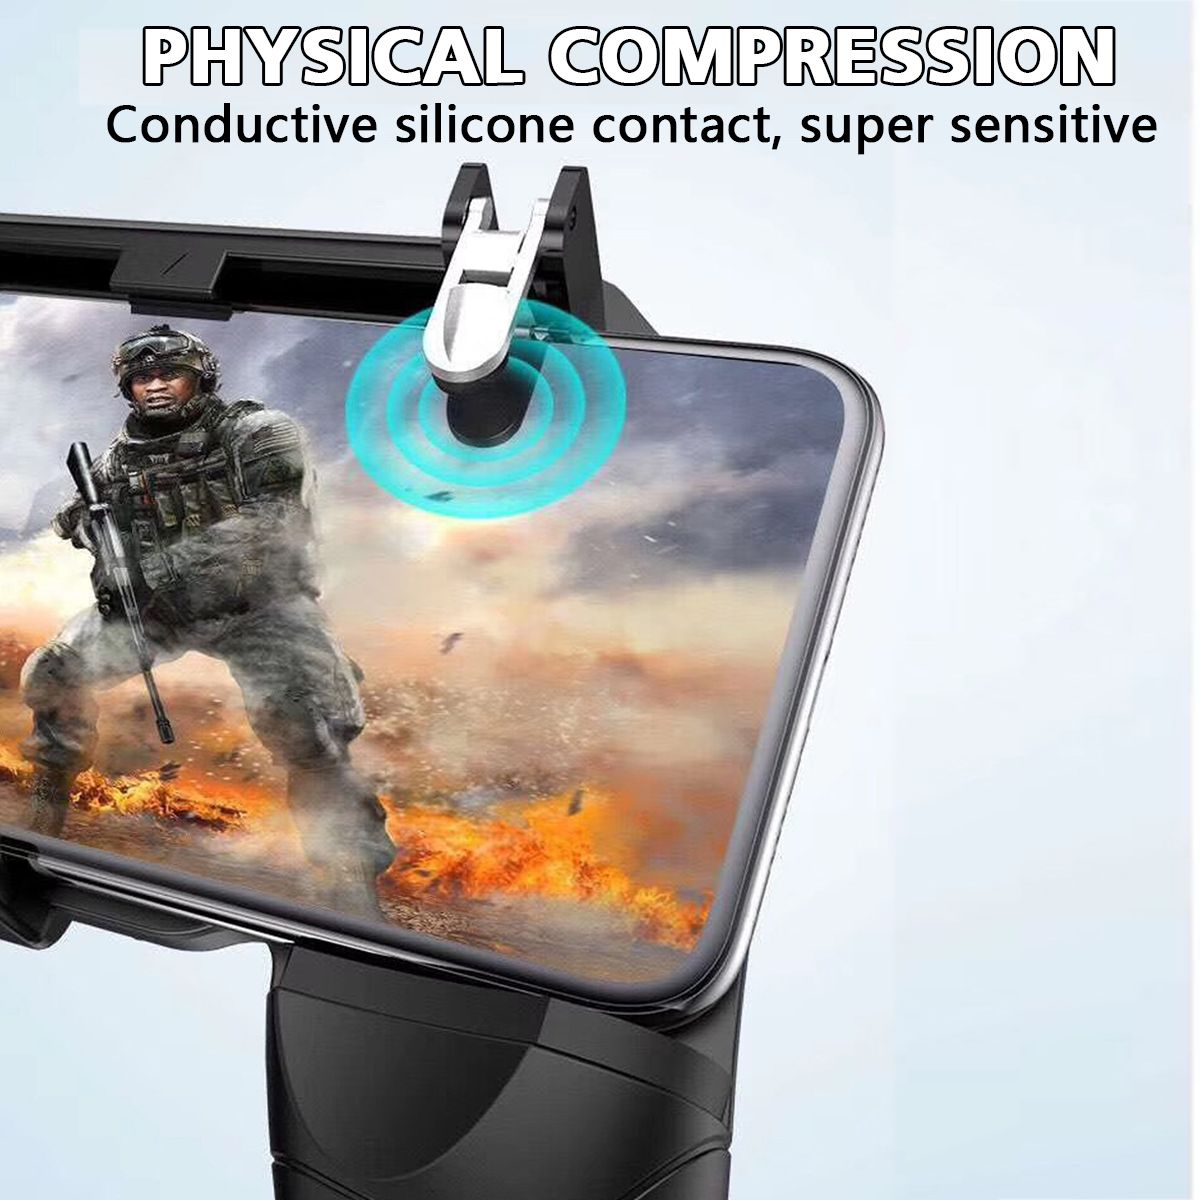 W18-Joystick-Shooter-Button-Fire-Trigger-Gamepad-Game-Controller-for-iOS-Android-PUBG-Games-1660470